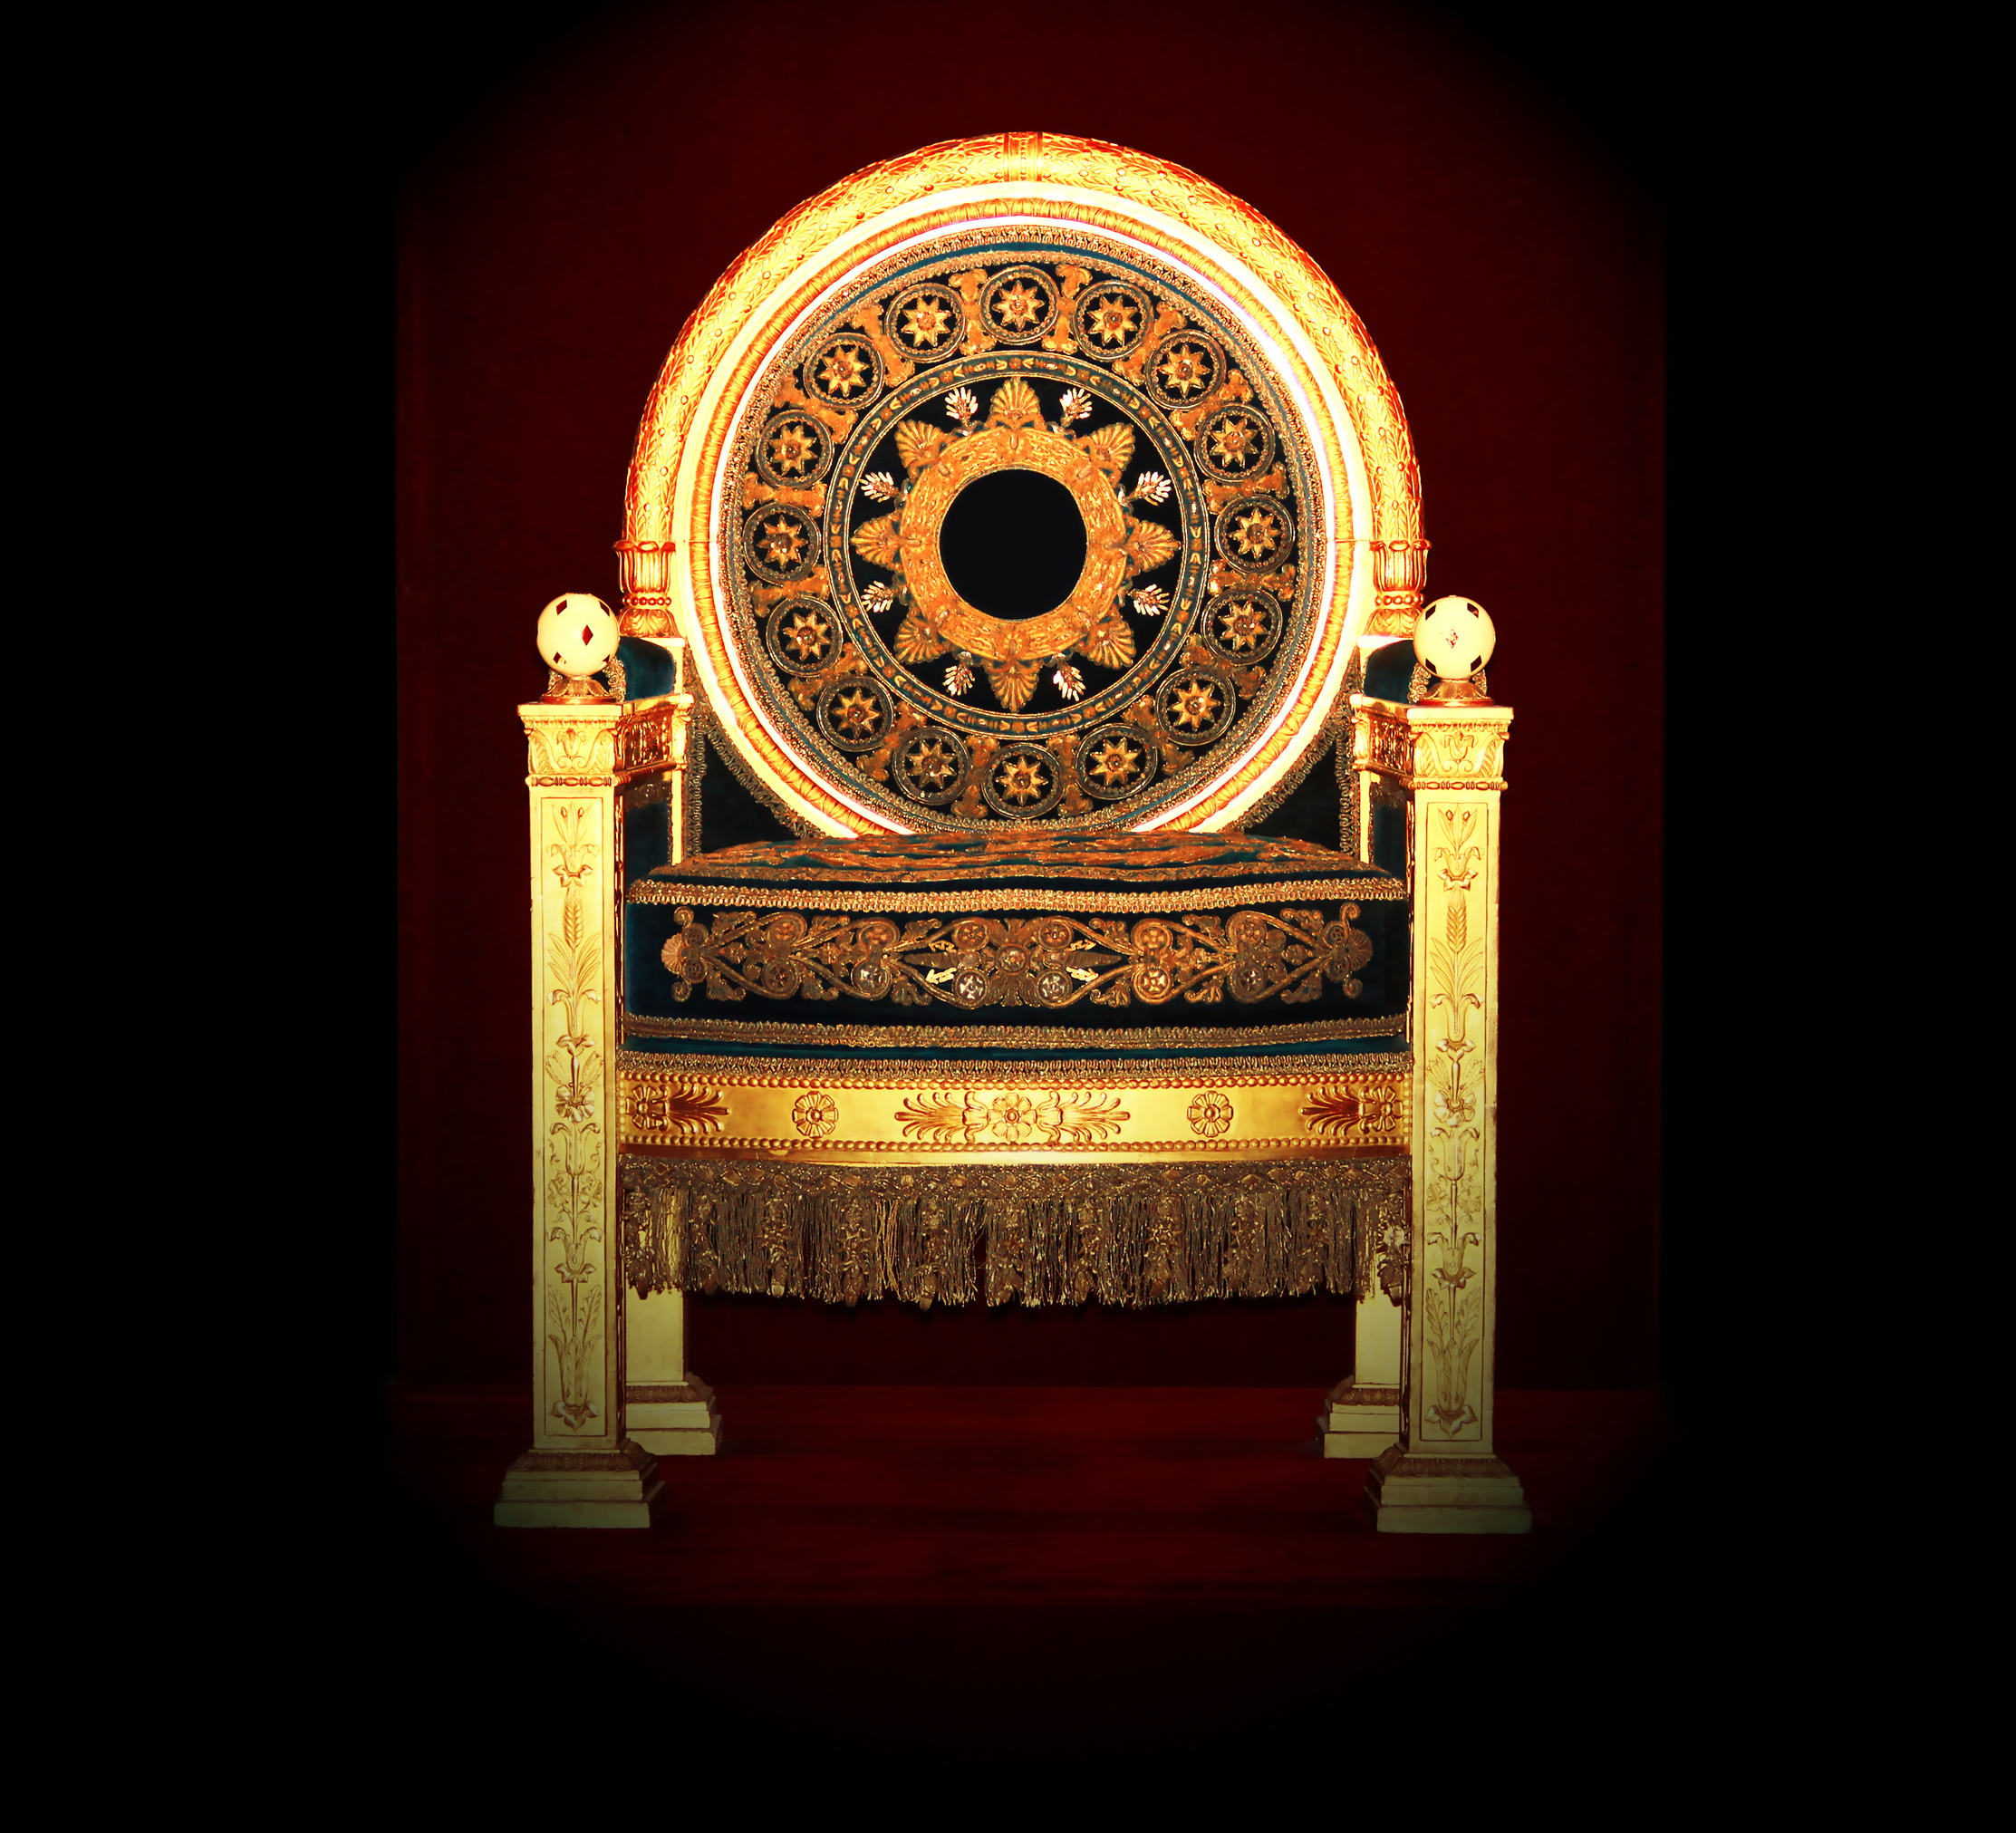 Magnificent and ancient throne for the Emperor.